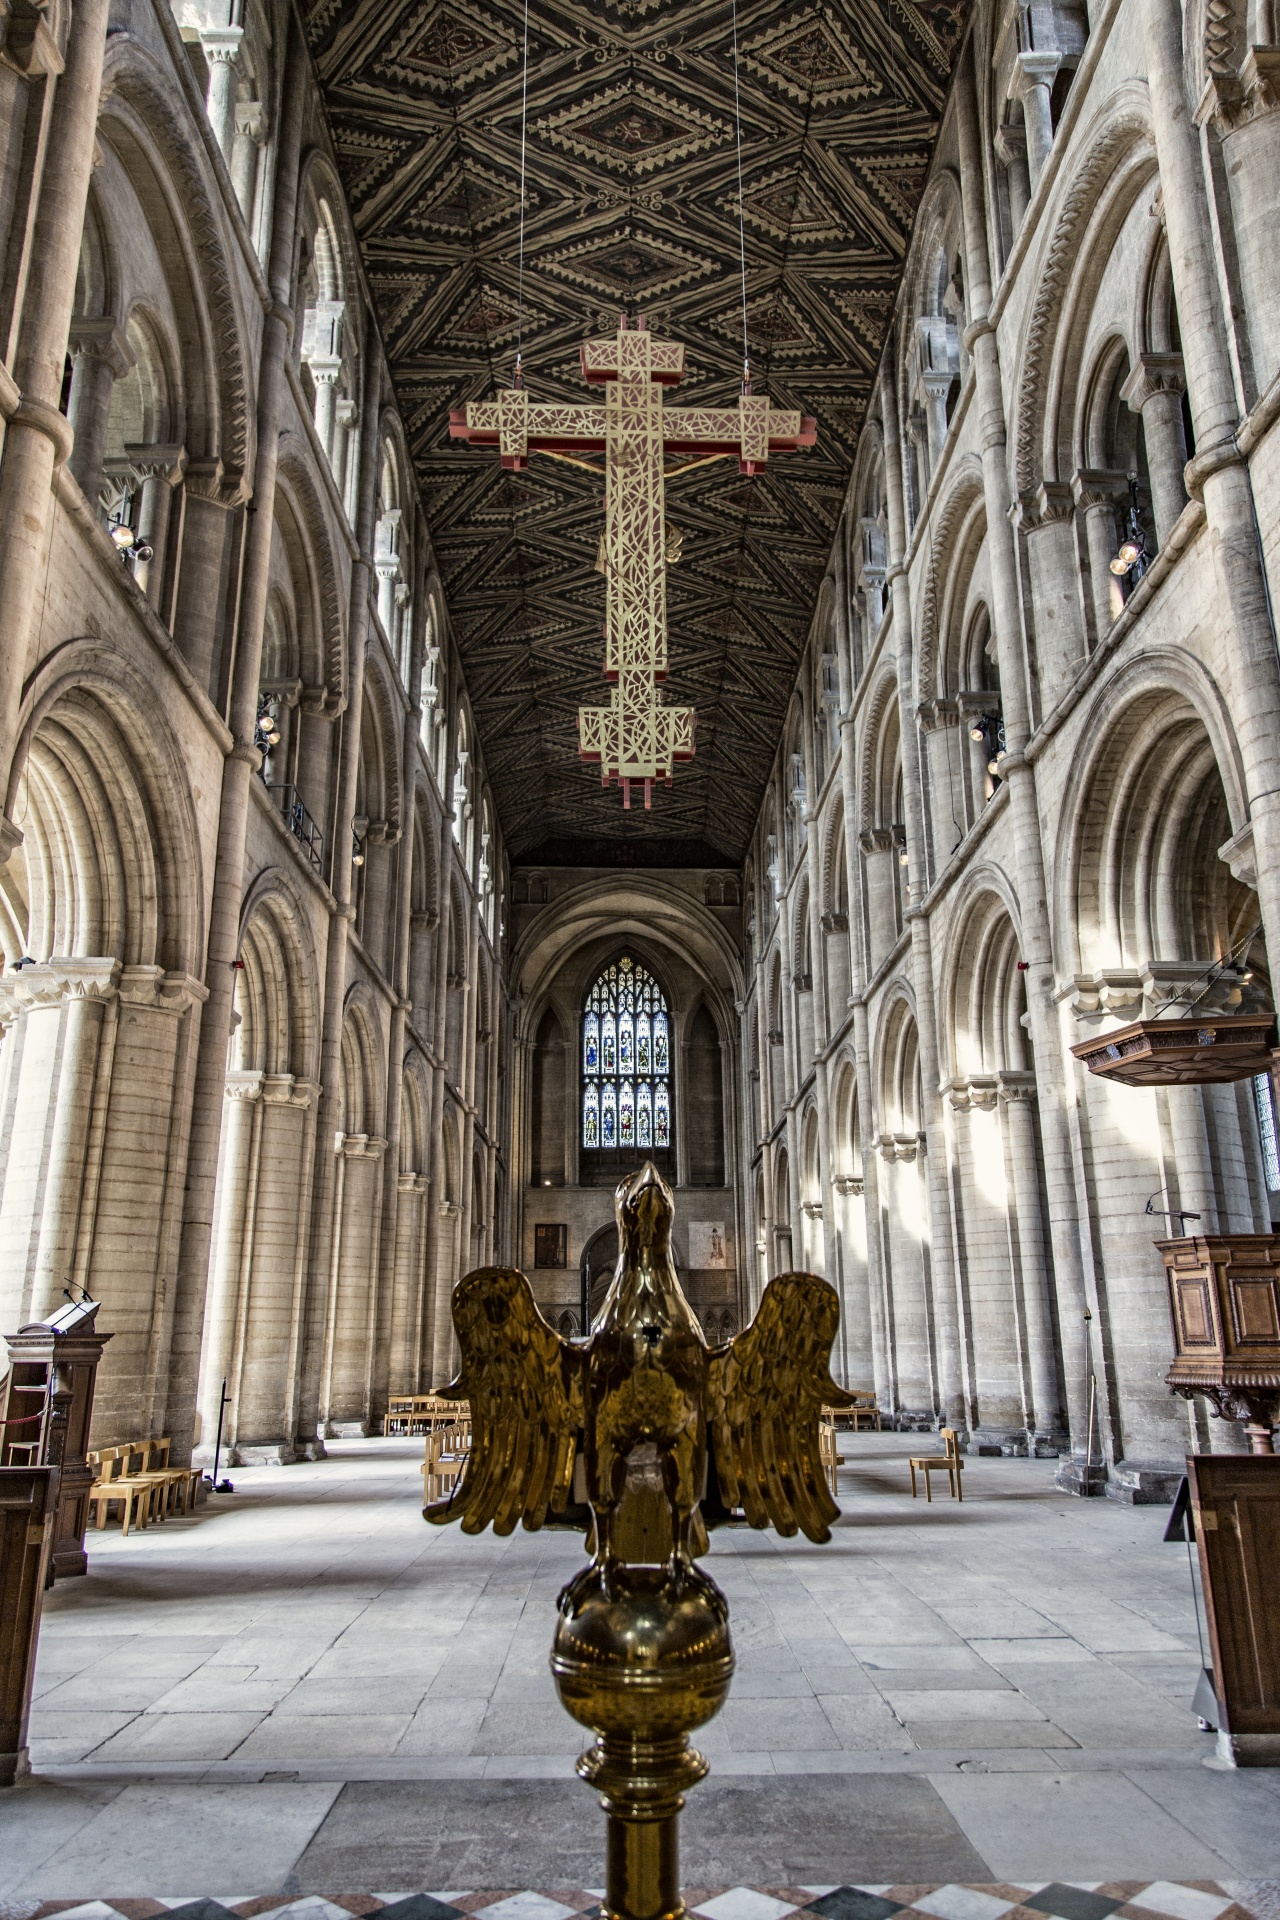 Peterborough Cathedral, properly the Cathedral Church of St Peter, St Paul and St Andrew – also known as Saint Peter's Cathedral in the United Kingdom – is the seat of the Anglican Bishop of Peterborough